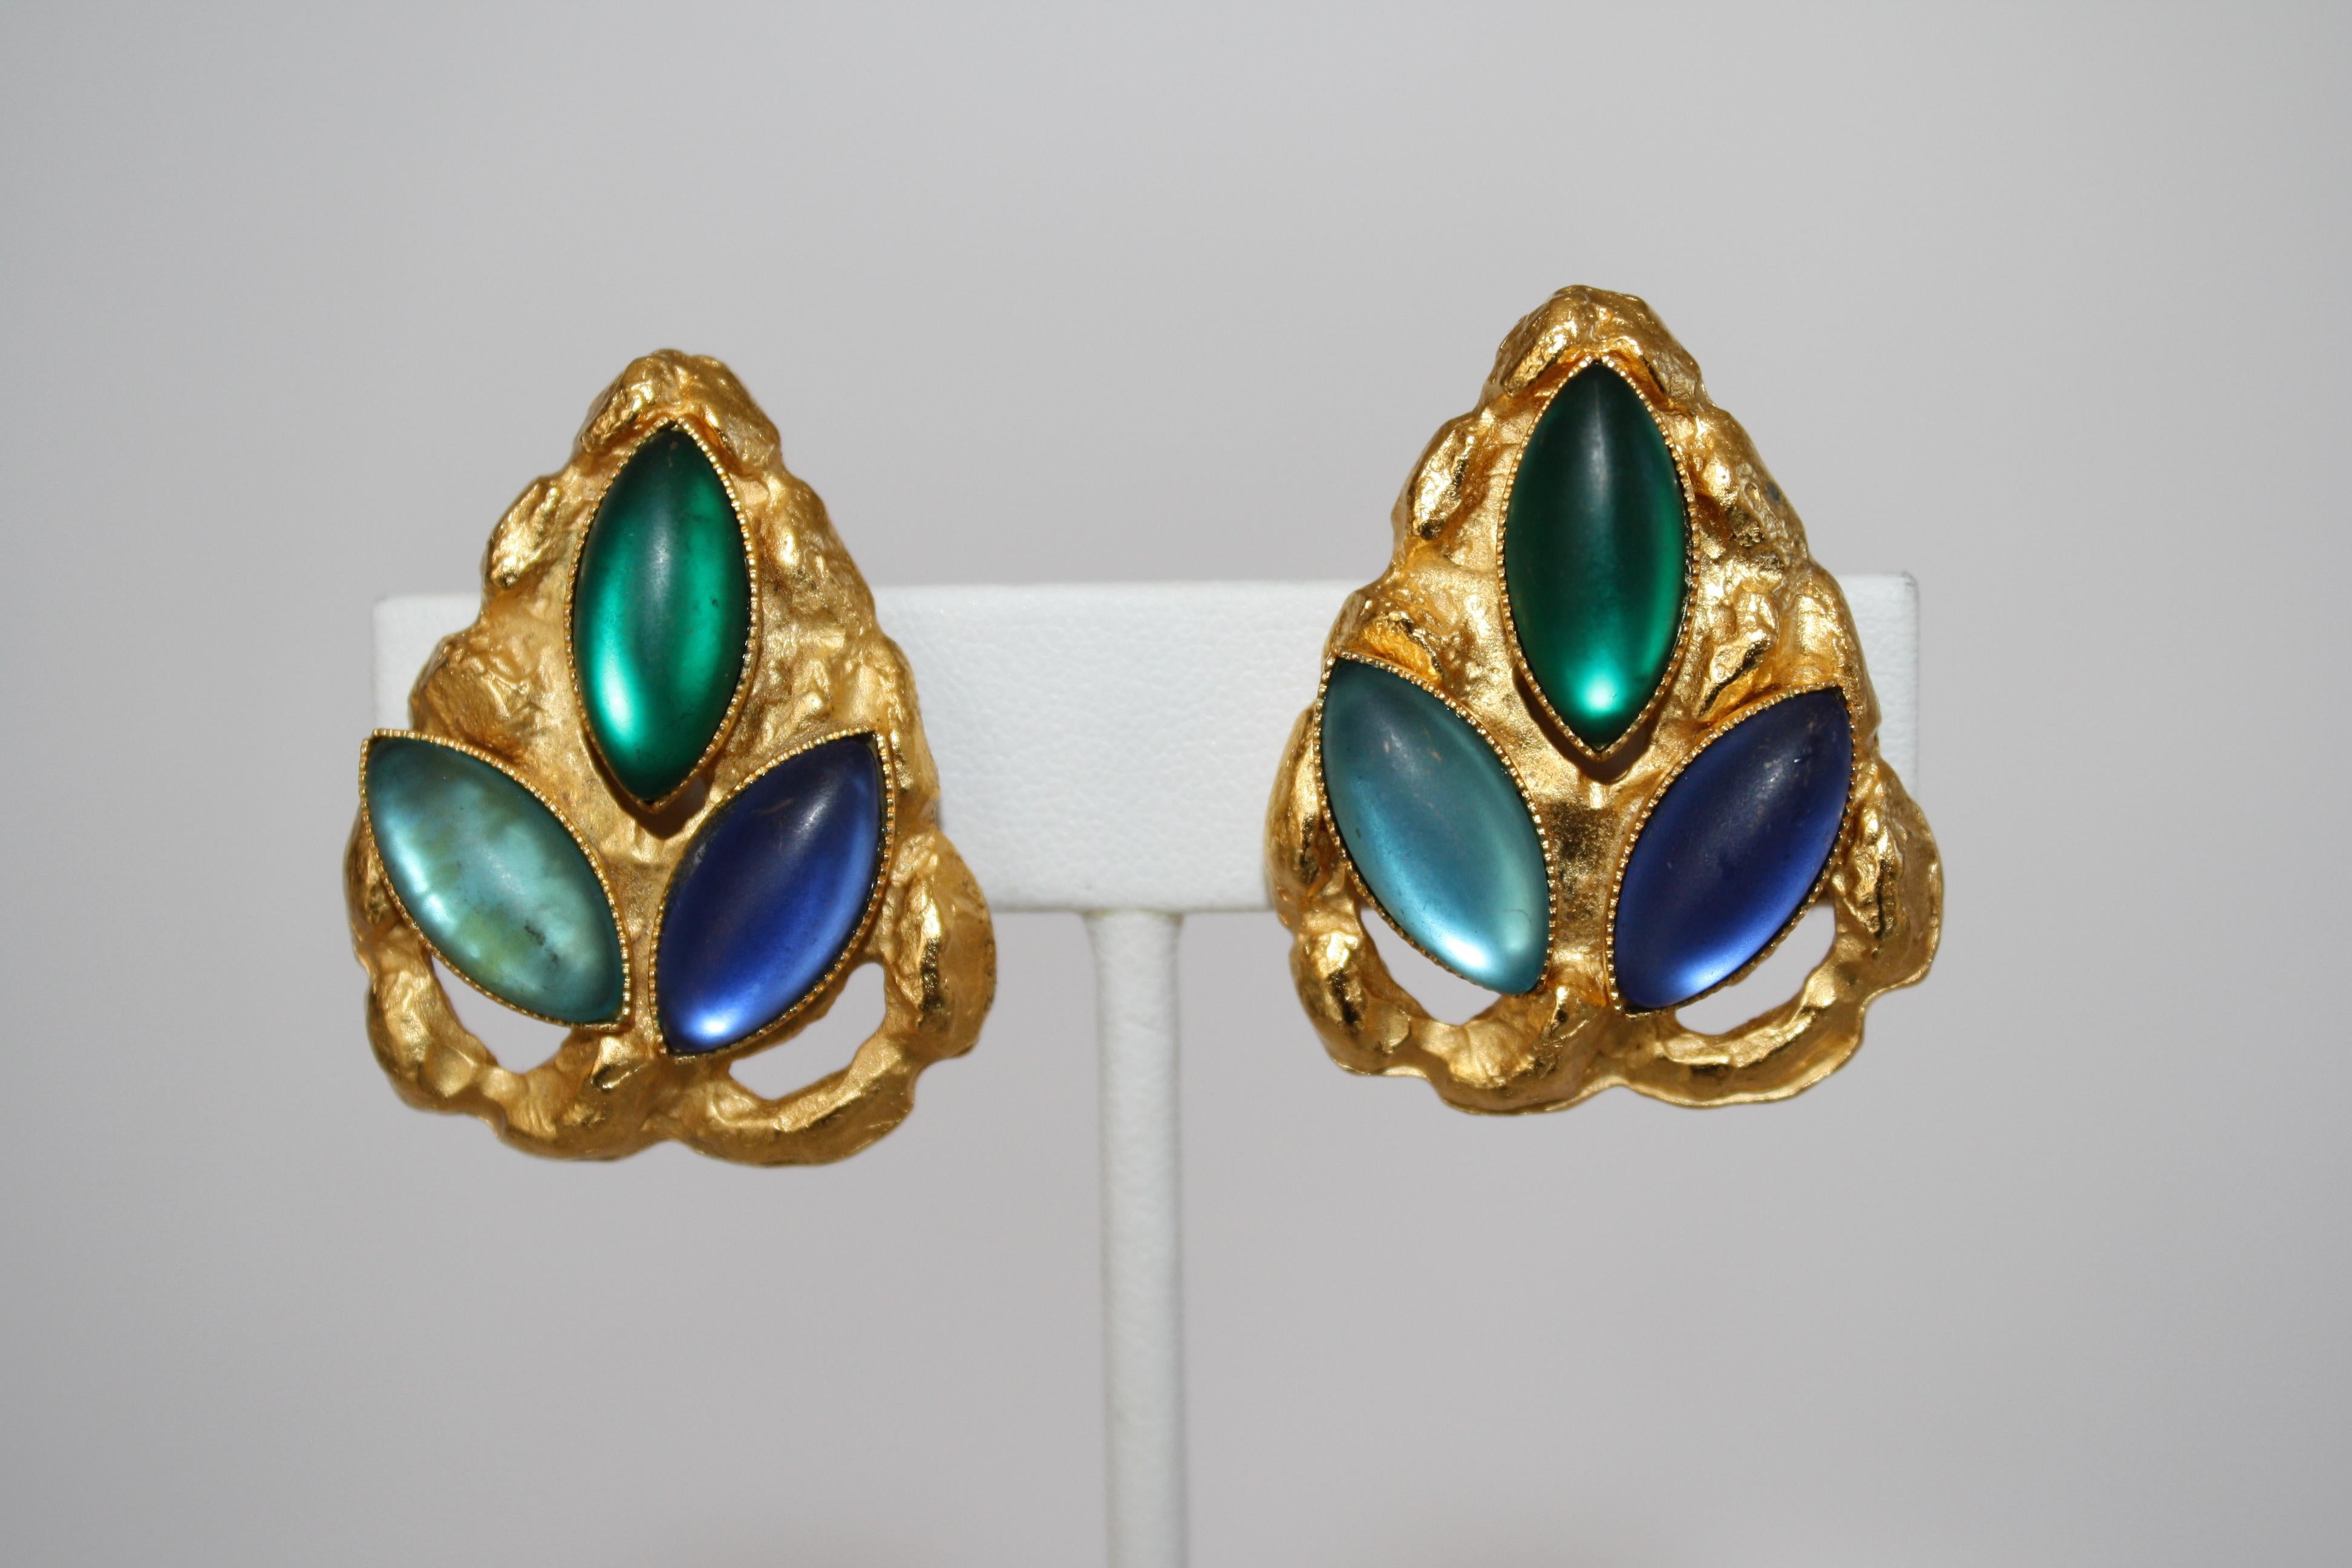 Green and blue vintage stone earrings on gold plated hammered clips from French designer Carole St. Germes. 